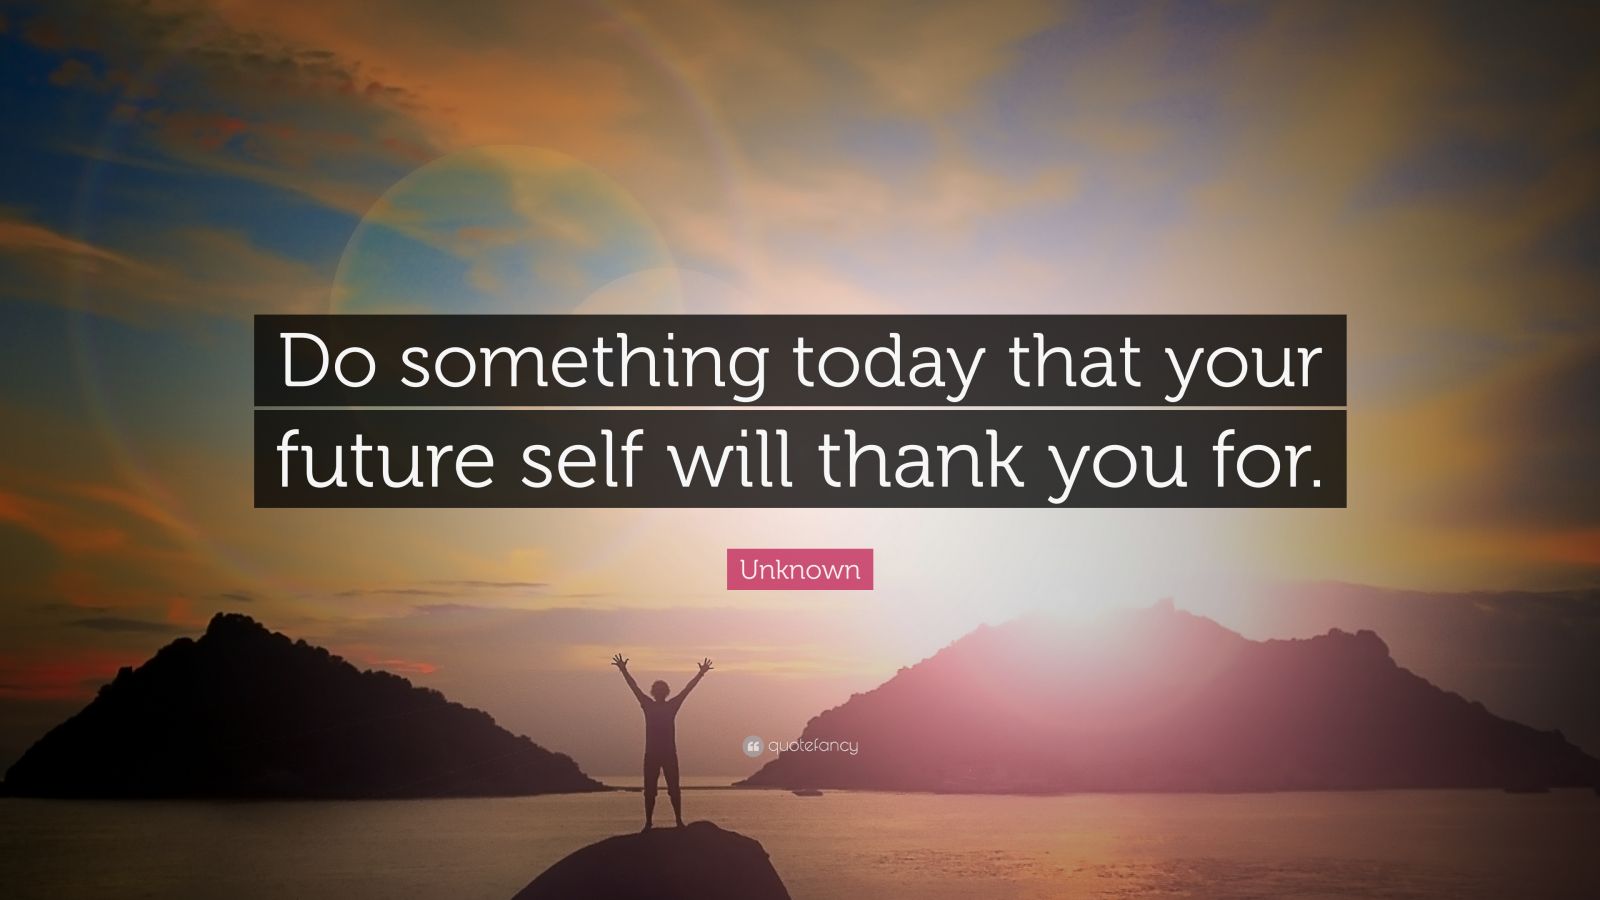 Unknown Quote: “Do something today that your future self will thank you